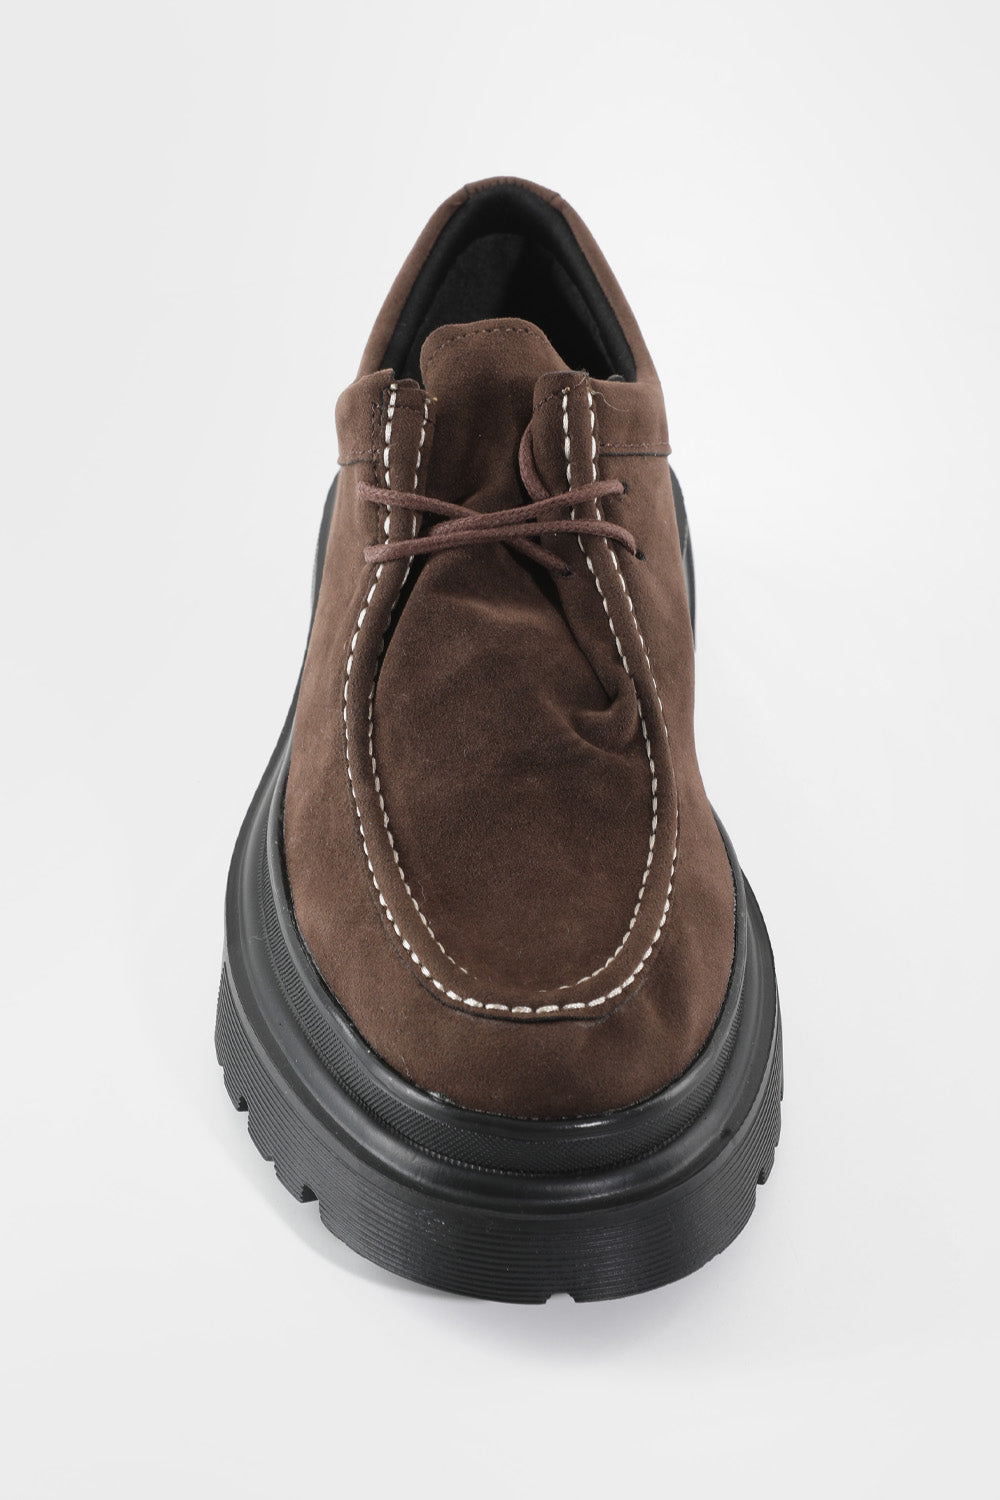 TOP STITCHED LACEUP SUEDE SHOES